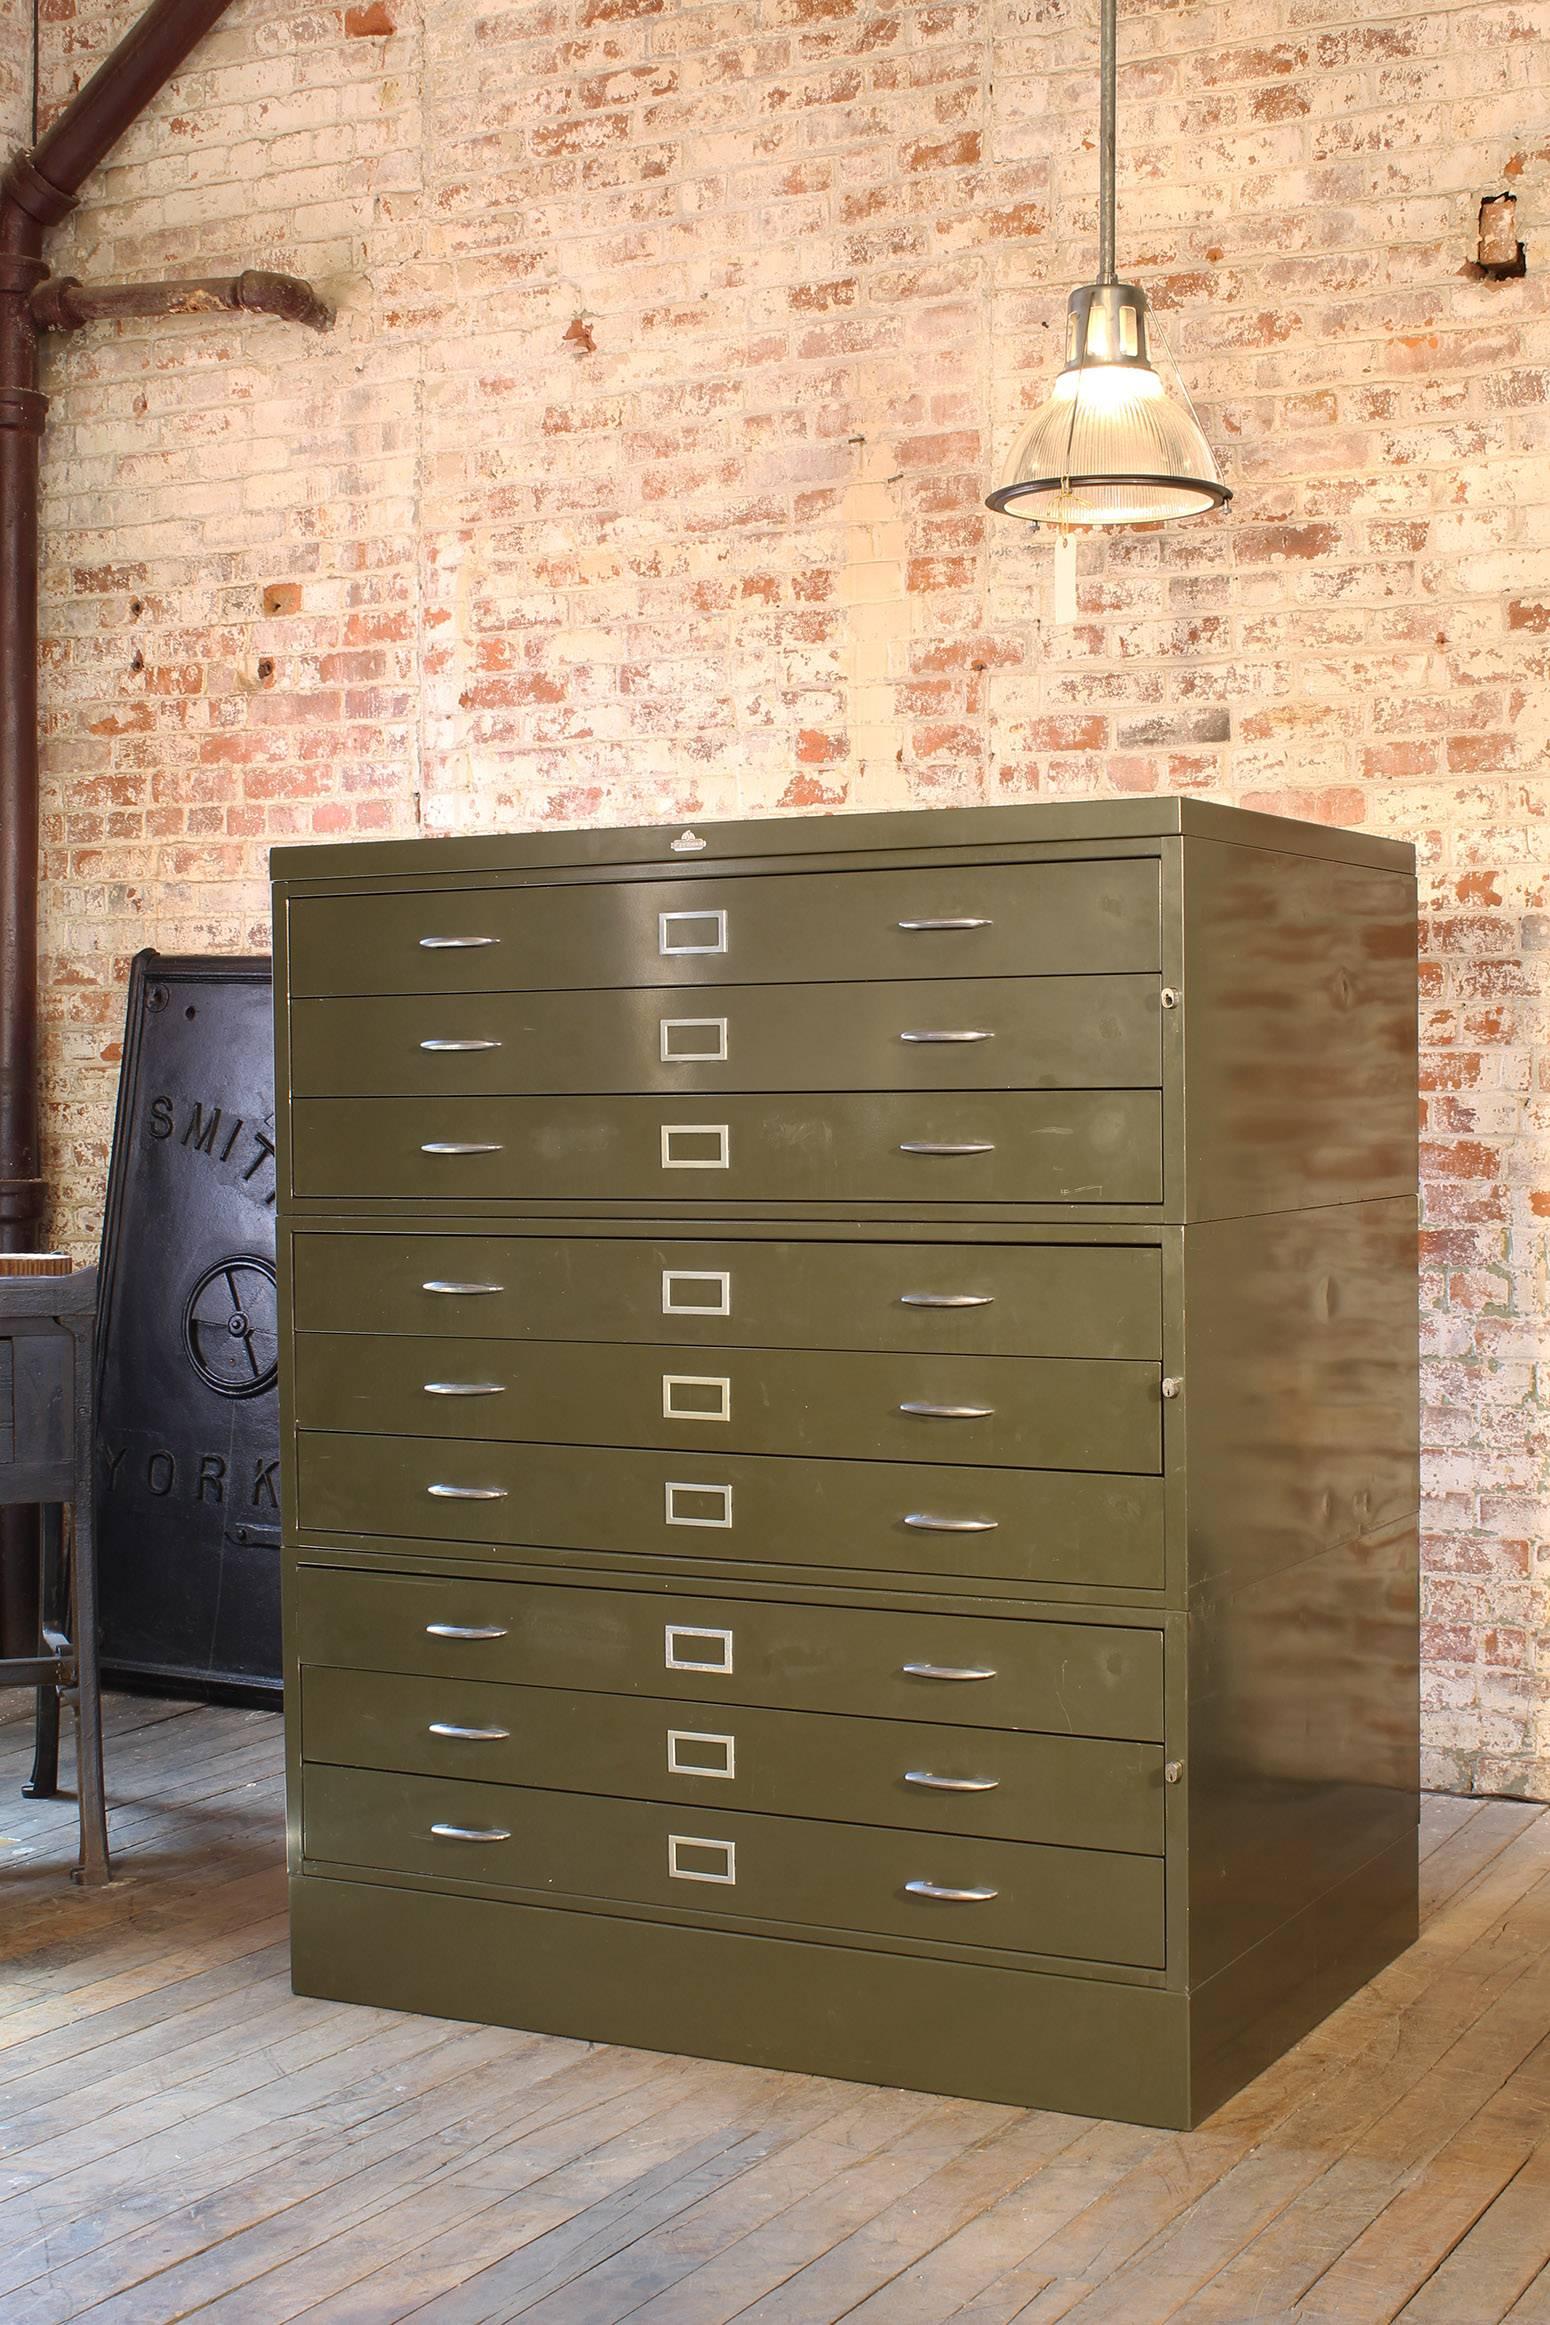 Vintage nine-drawer metal flat-file cabinet made by All-Steel. Architect's, draftsman drawing and document storage. Measures: 56 1/2